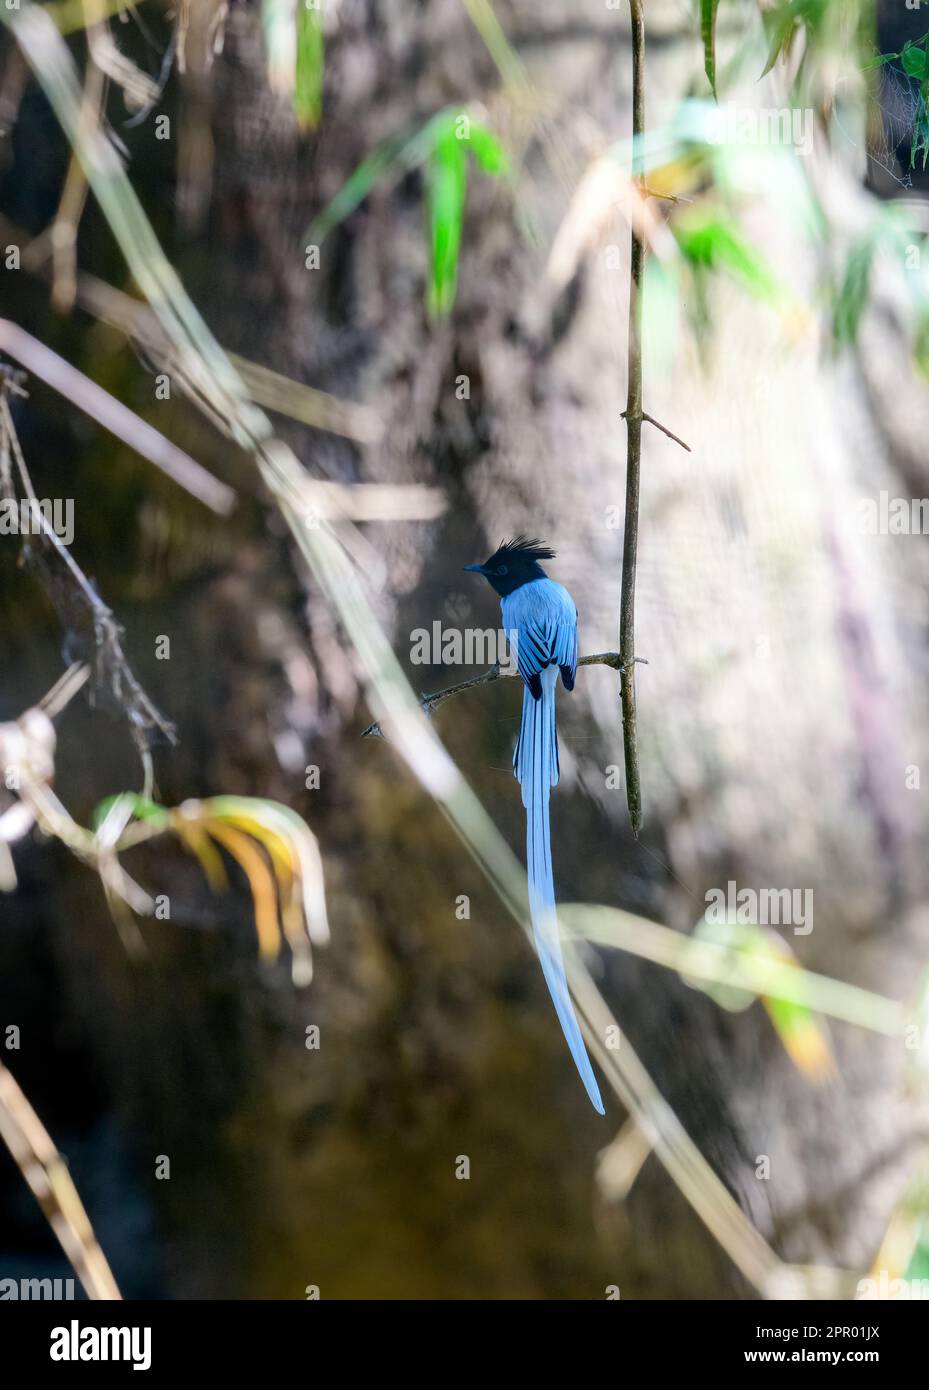 Amidst the lush green forest, the Paradise Flycatcher spreads its wings, a vision of elegance and grace. Stock Photo